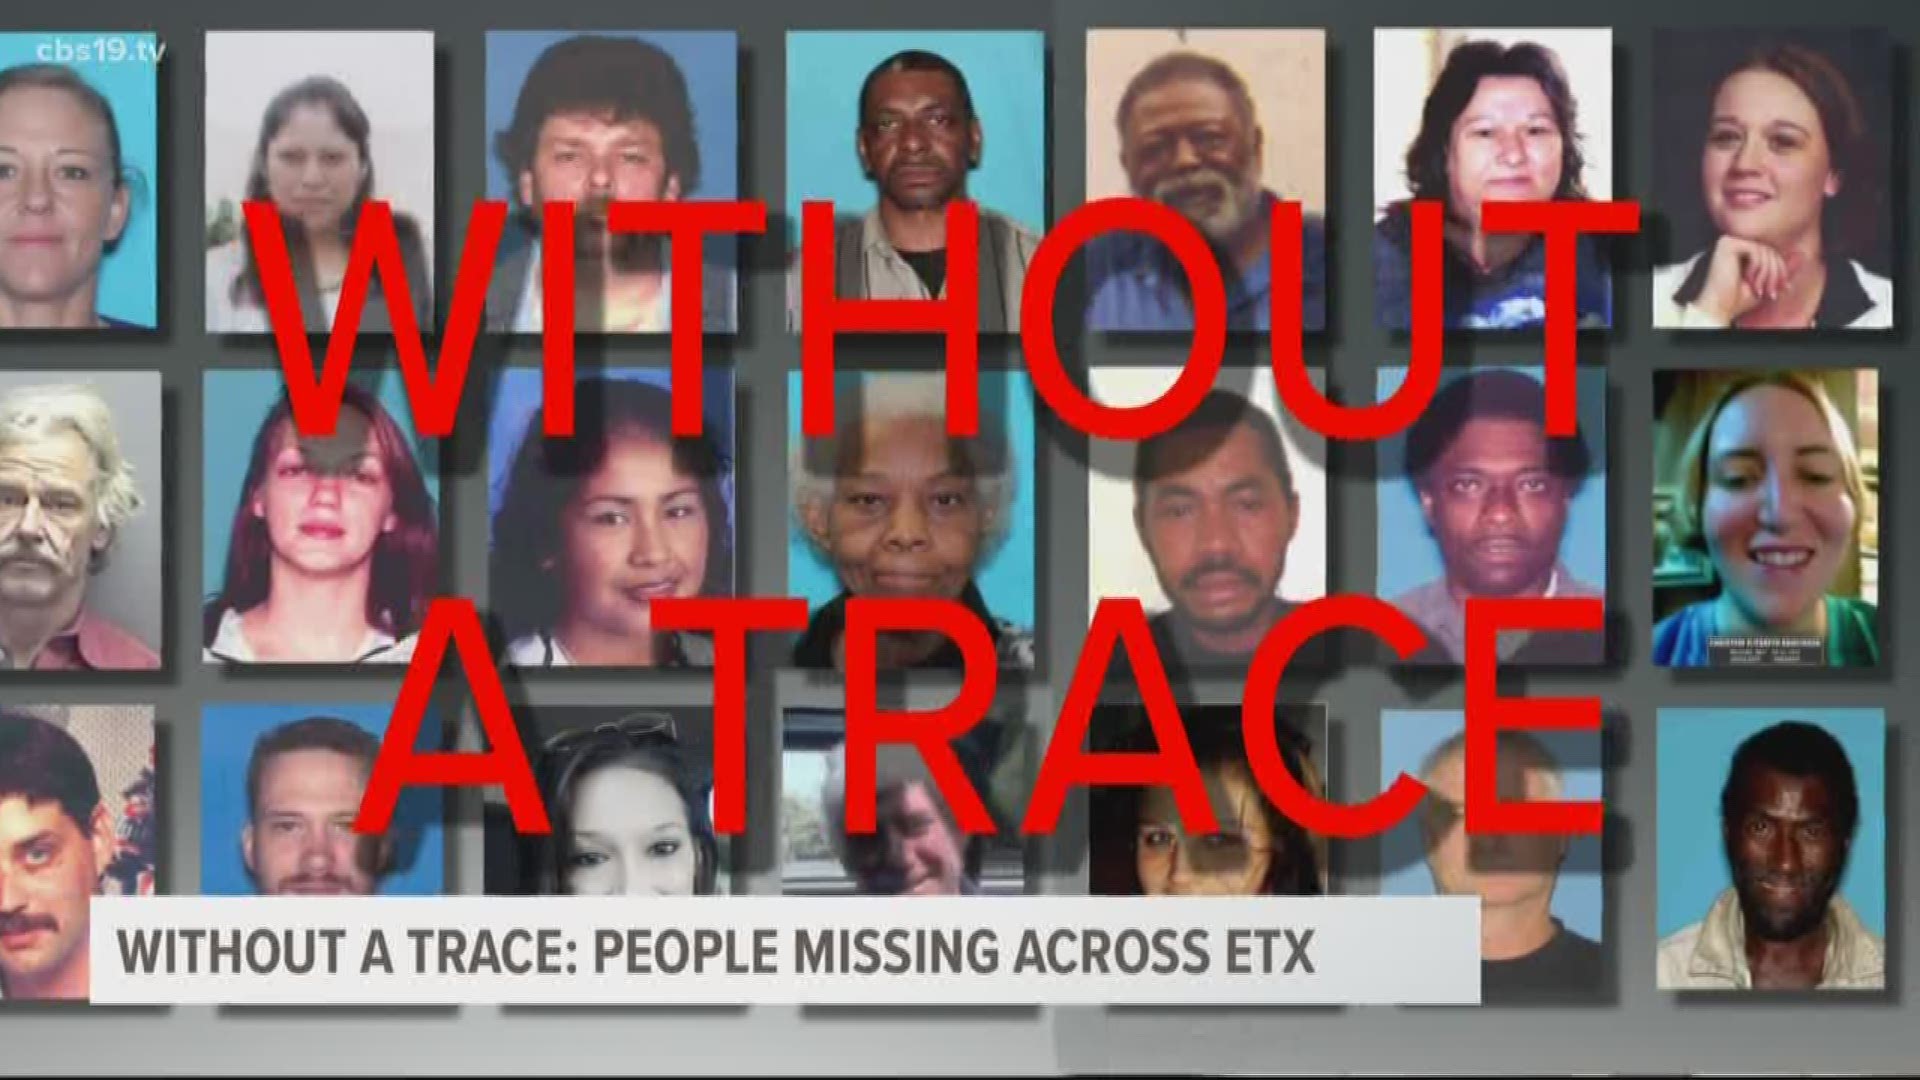 Over the last 15 years, dozens of people have disappeared. Rusk County Sheriff, Jeff Price says many of them disappear "without a trace".